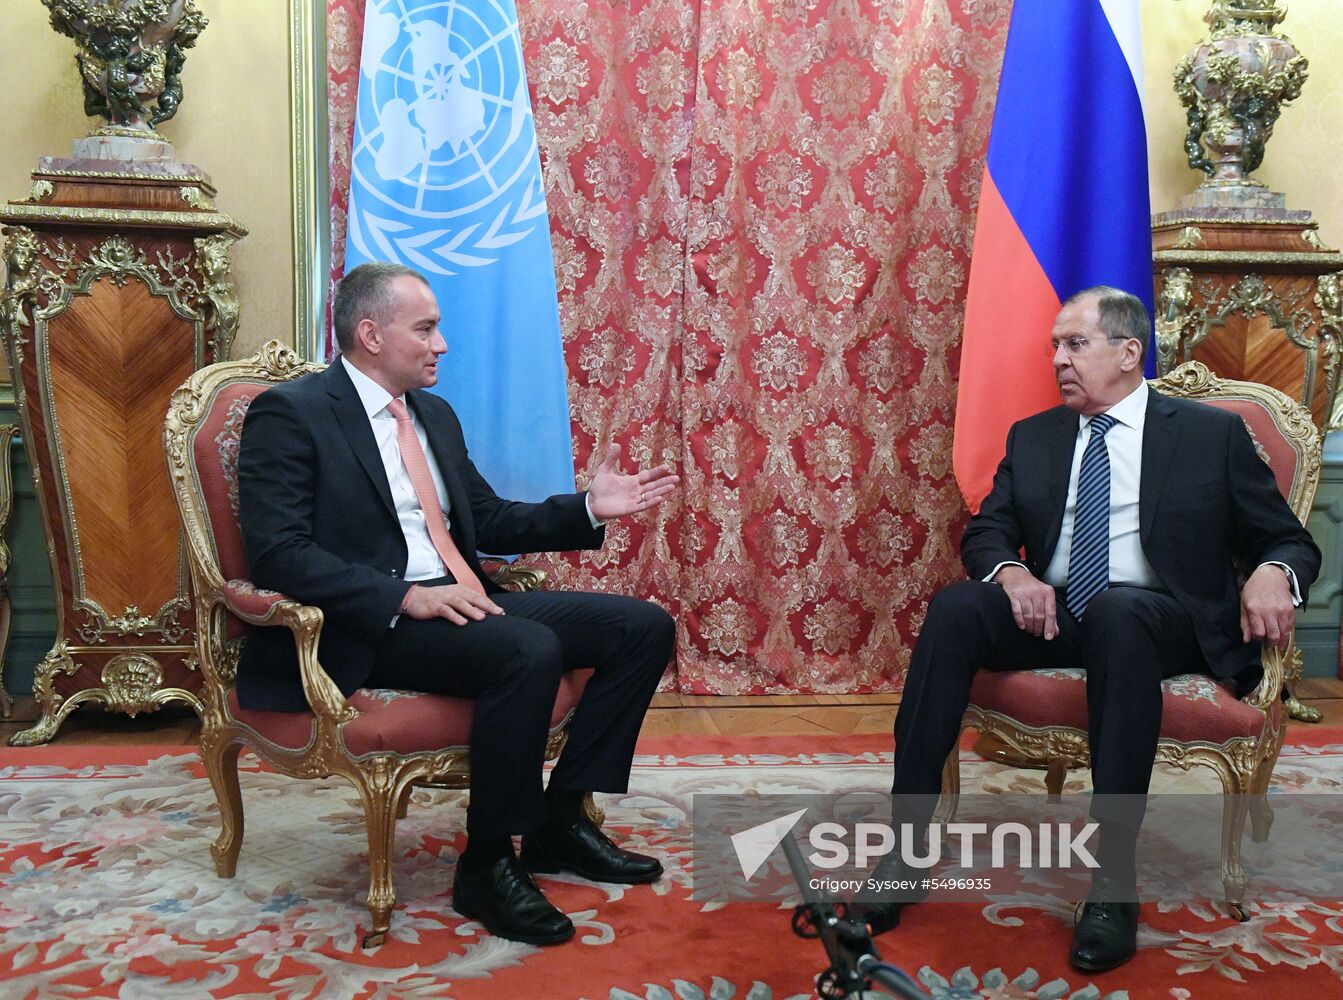 Foreign Minister Sergei Lavrov meets with UN Special Coordinator for Middle East Peace Process Nickolay Mladenov